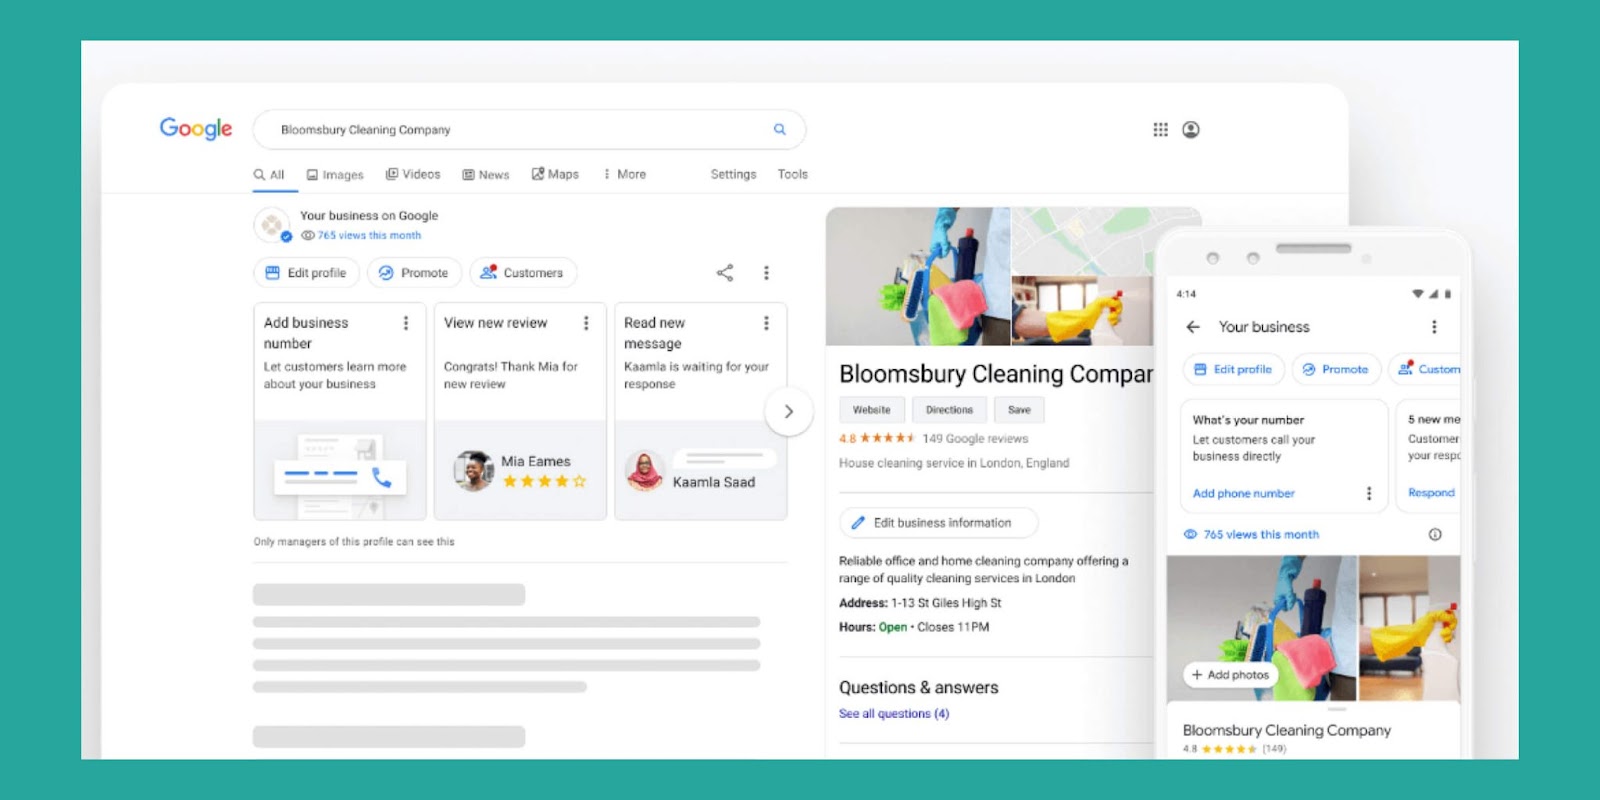 Google five star reviews: Update your Google business profile listing